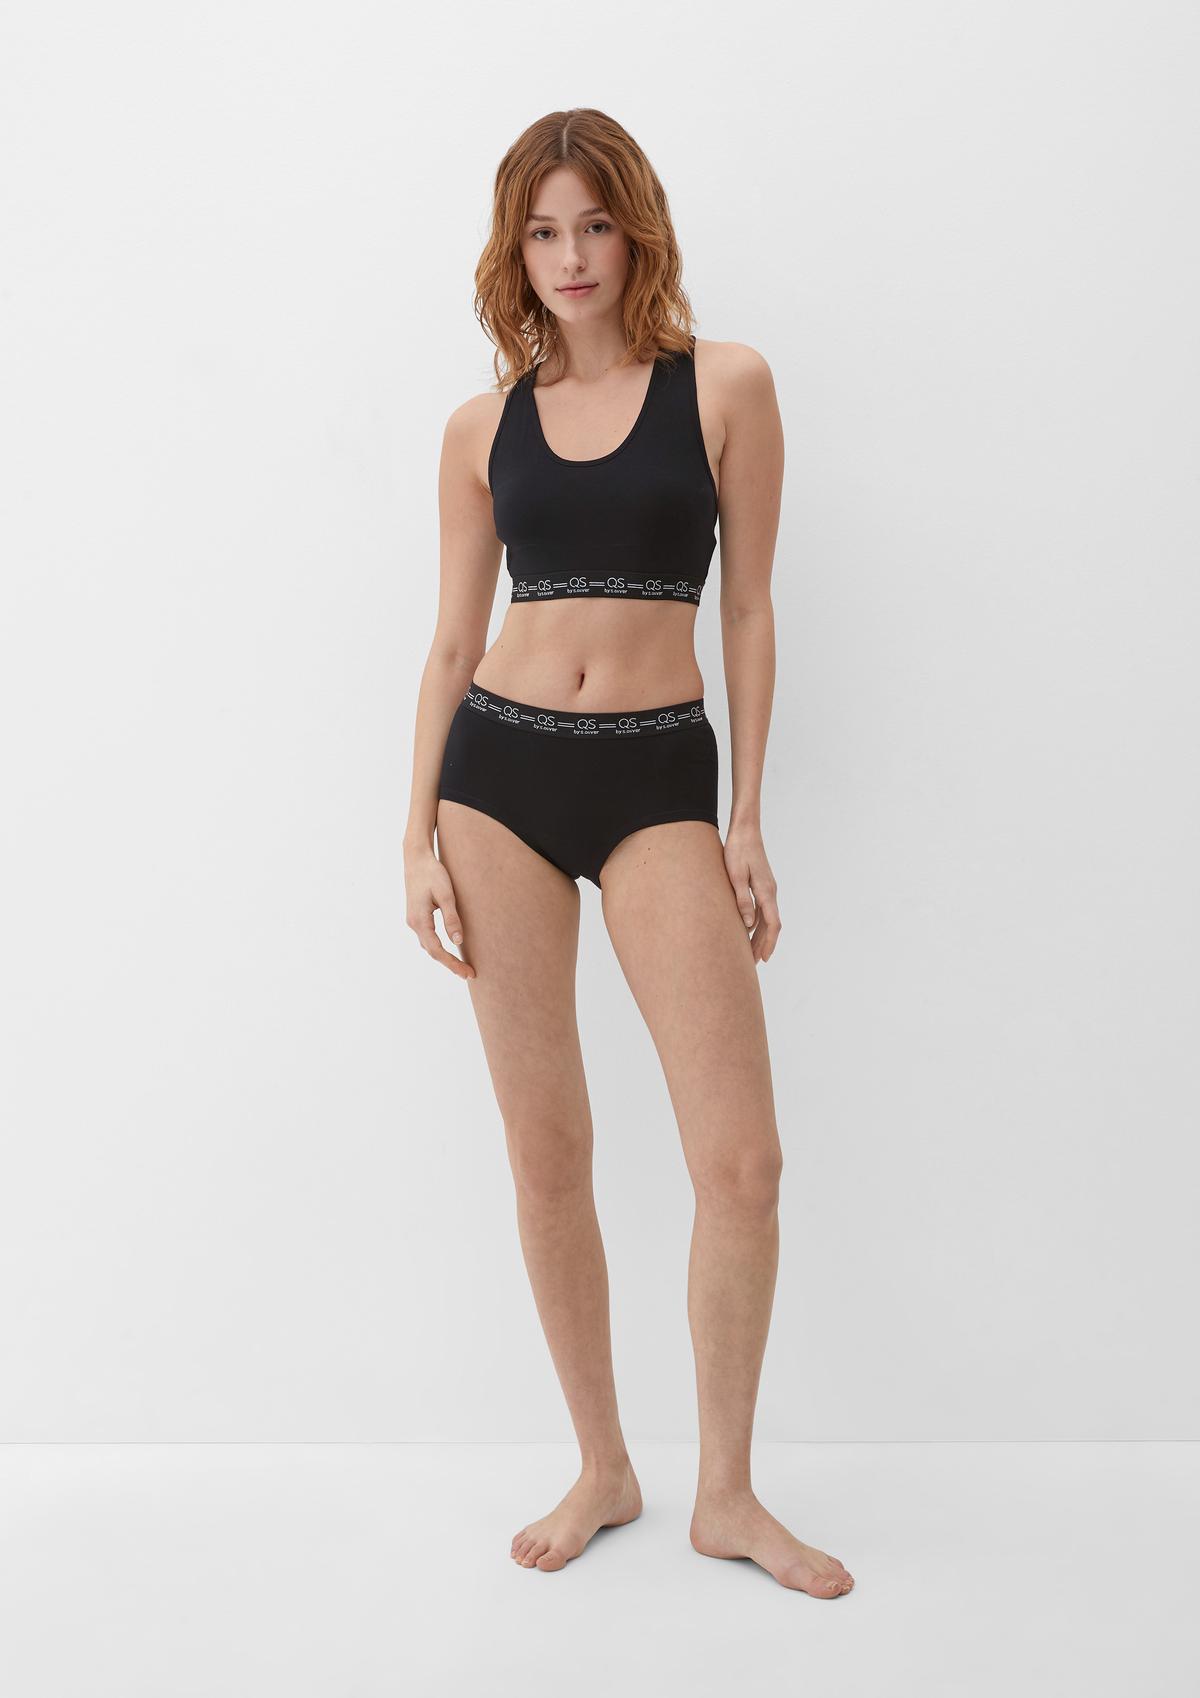 s.Oliver Sports bra with a racer back